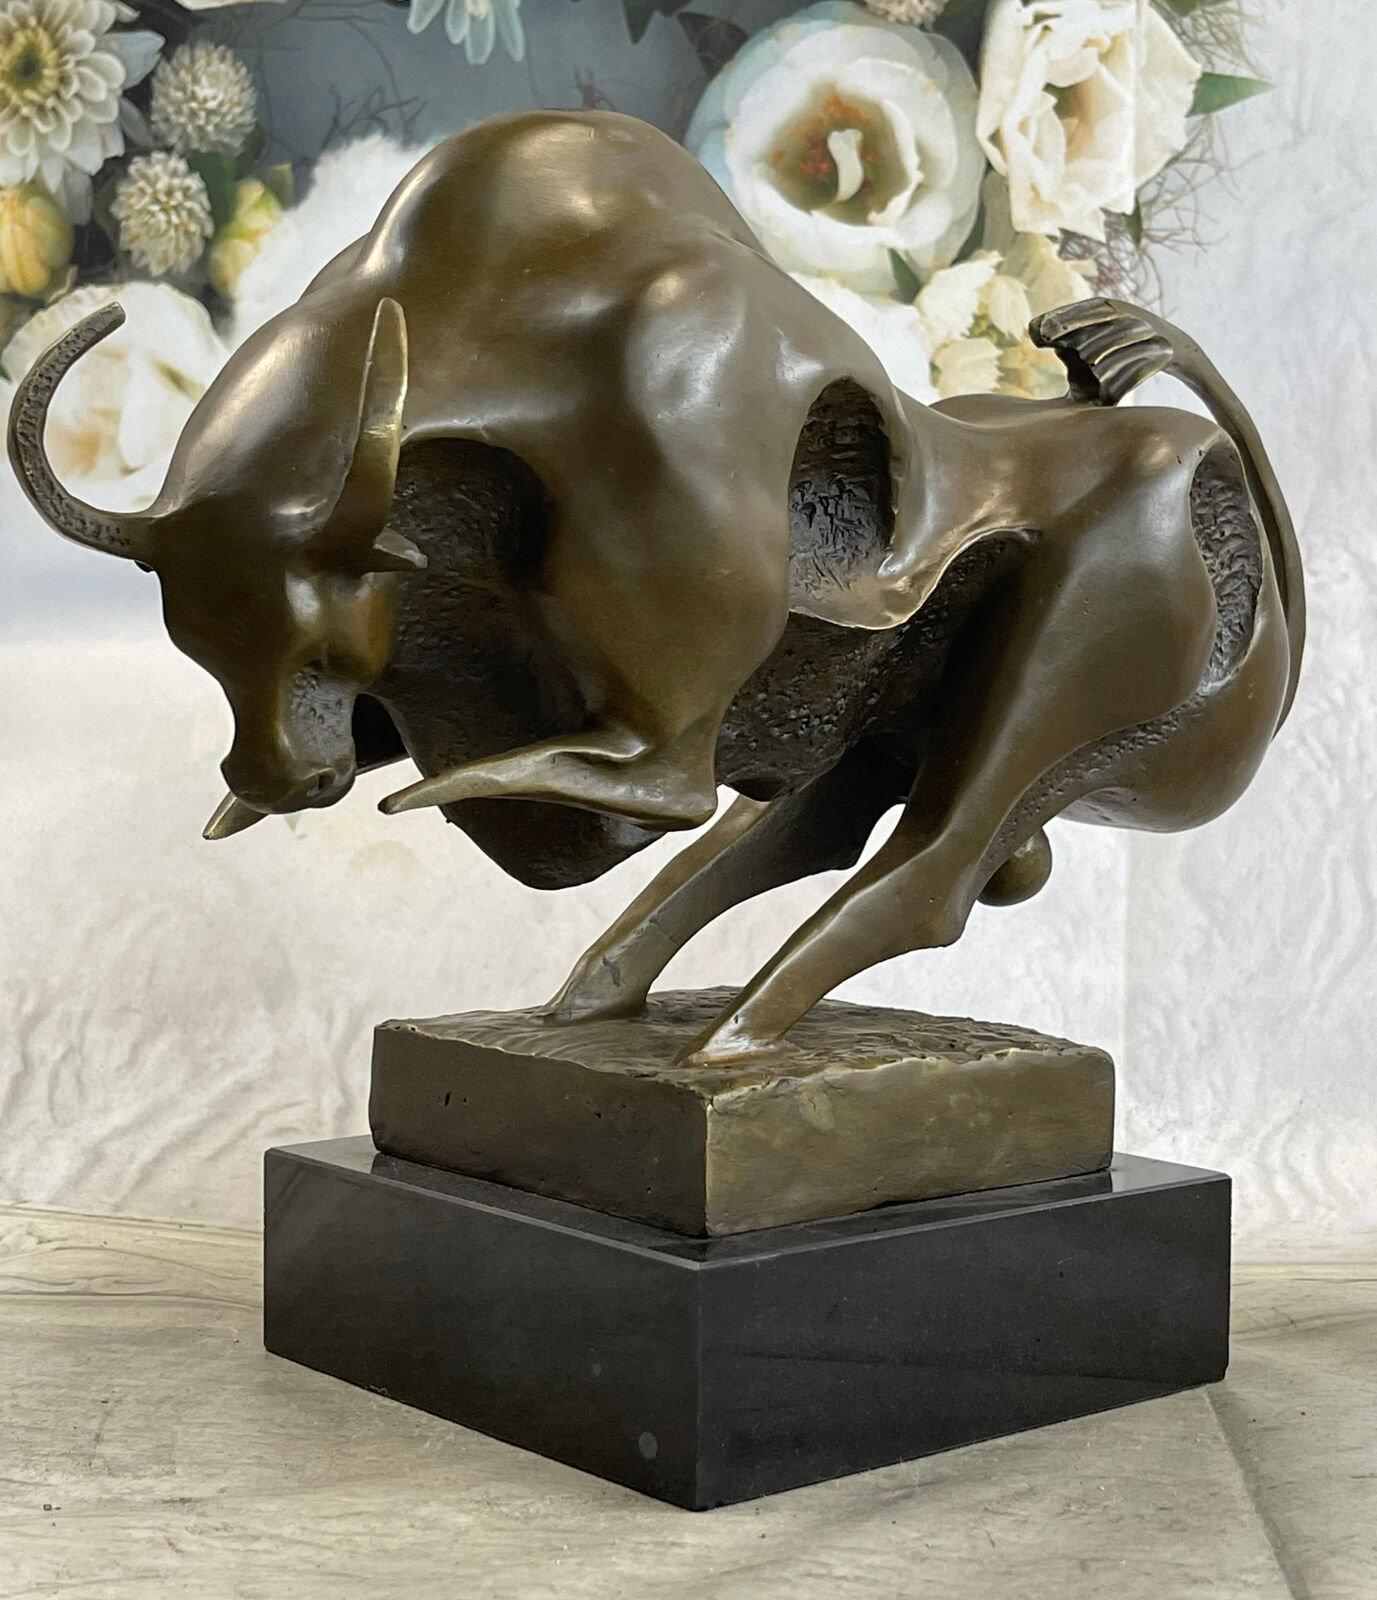 MODERN ABSTRACT CHARGING BULL SCULPTURE BY MILO FIGURE HOT CAST MARBLE FIGURINE